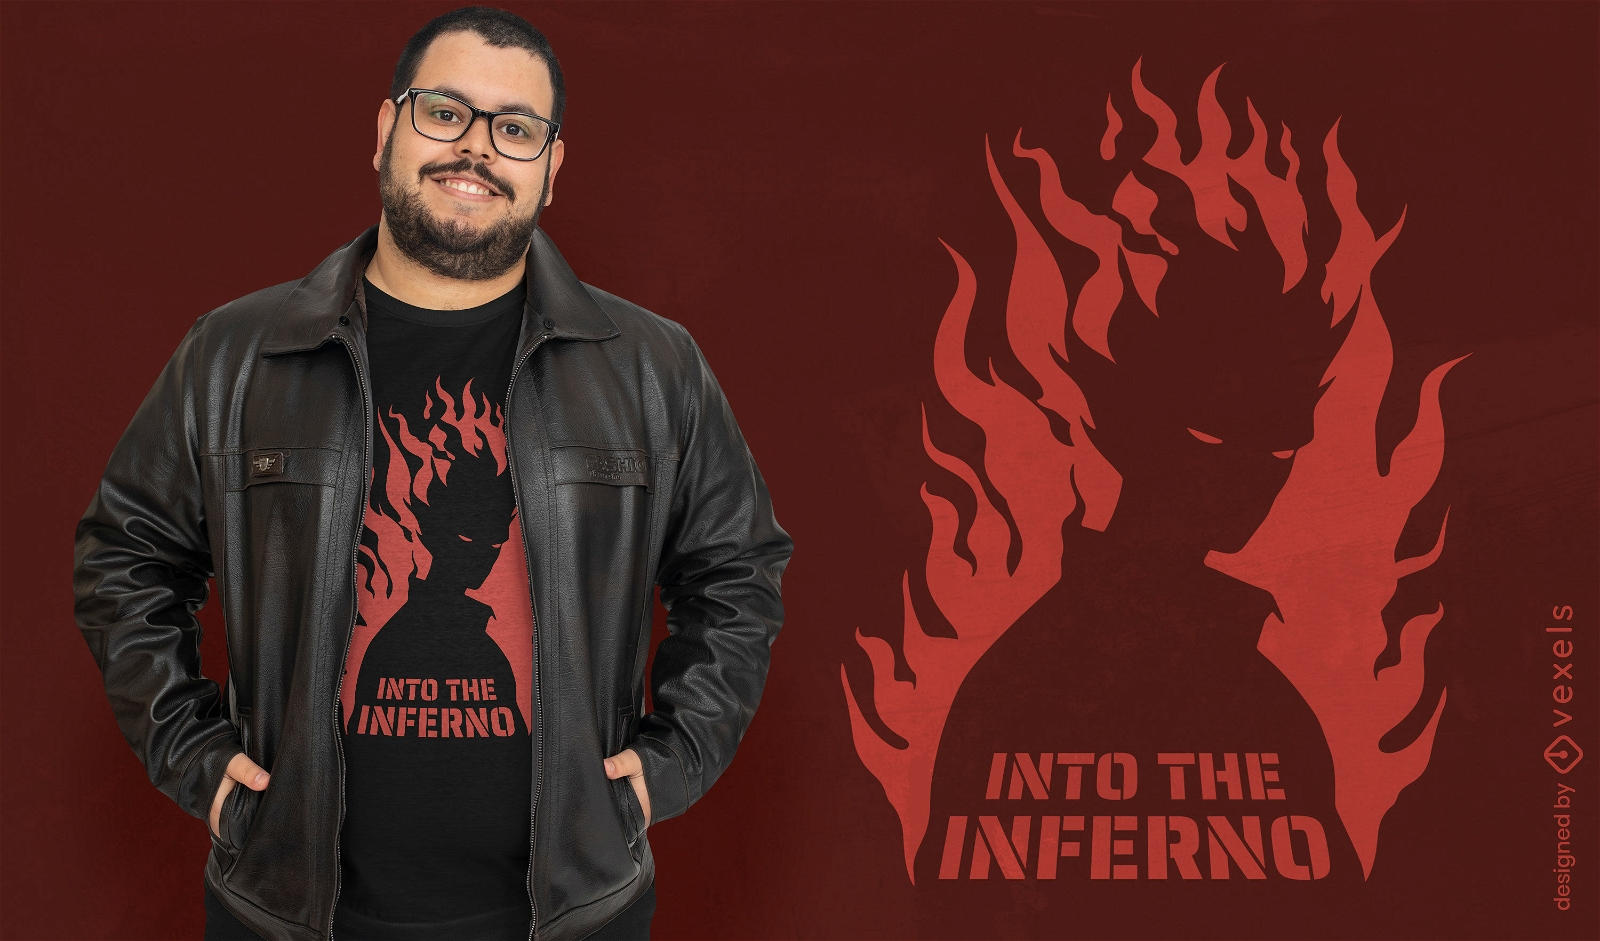 Into the inferno t-shirt design